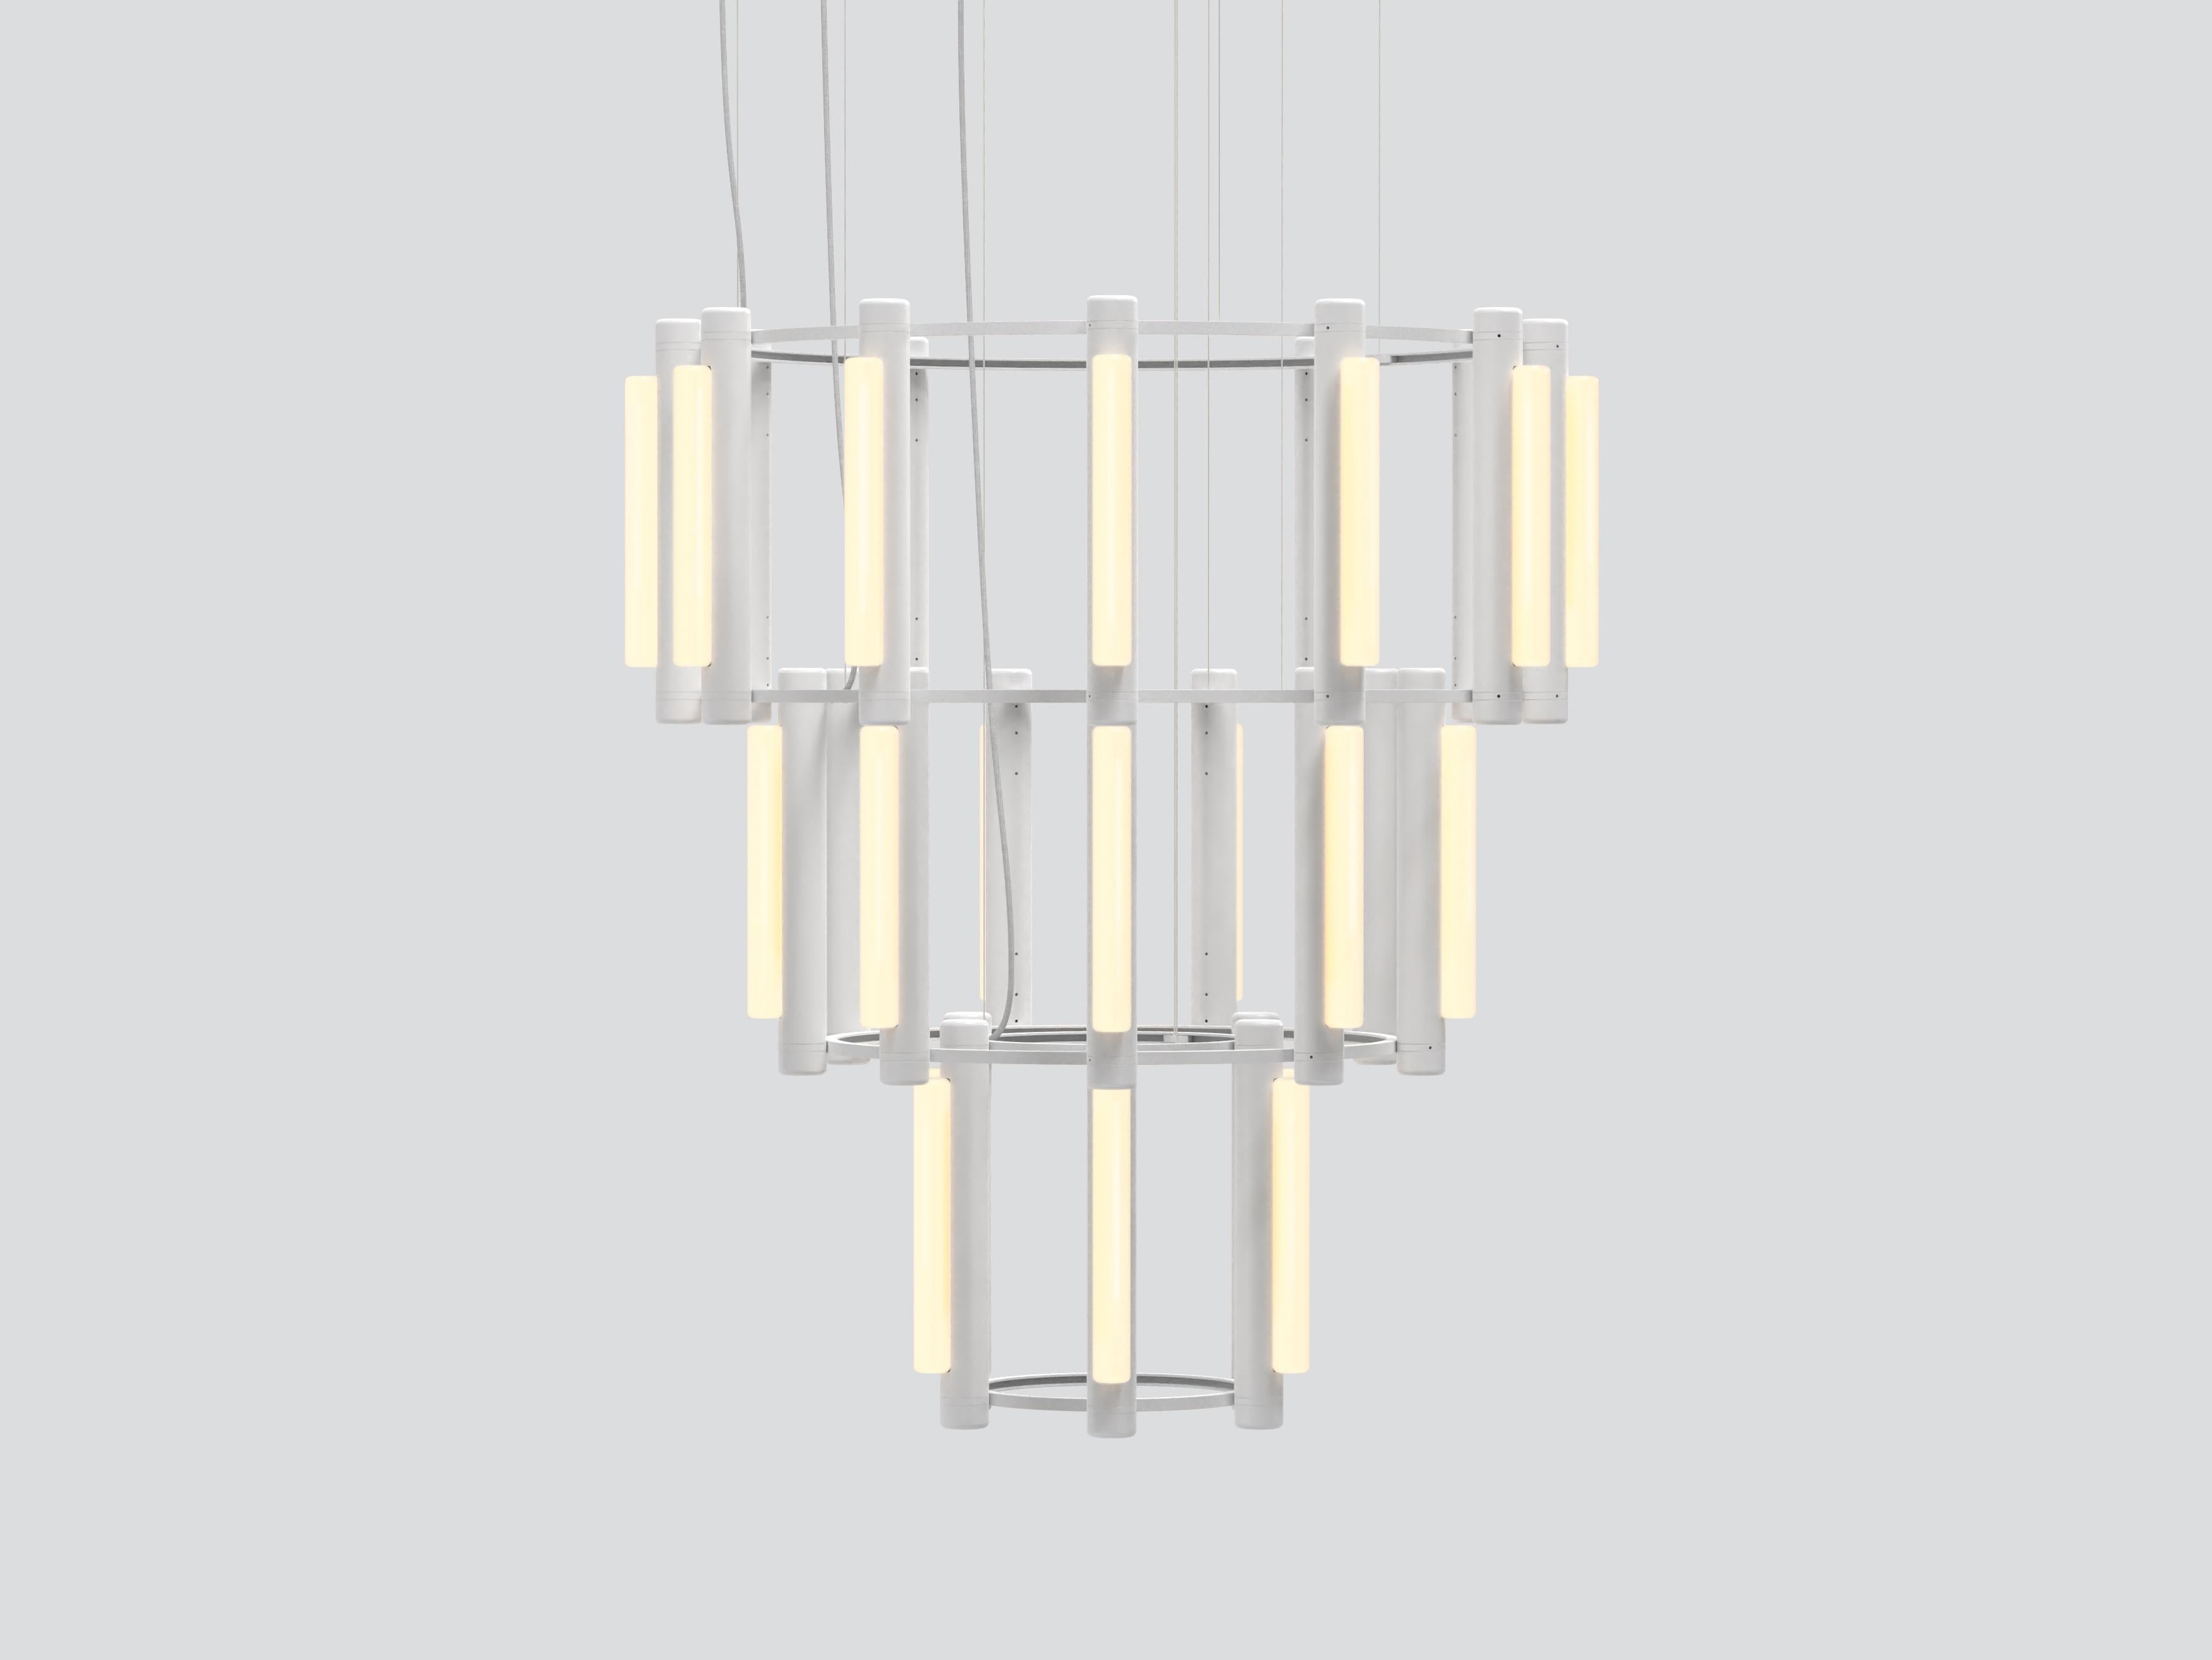 PIPELINE CHANDELIER 10 – PENDANT
by CAINE HEINTZMAN 

MATERIALS
– Aluminum Body
– Cast Acrylic

ELECTRICAL
– 27 x 5W LED
– 47,000 hour Lifetime
– 90+ CRI
– Input Voltage 100–240V + 277V
– Integral 24V DC power supply included 
– Dimming